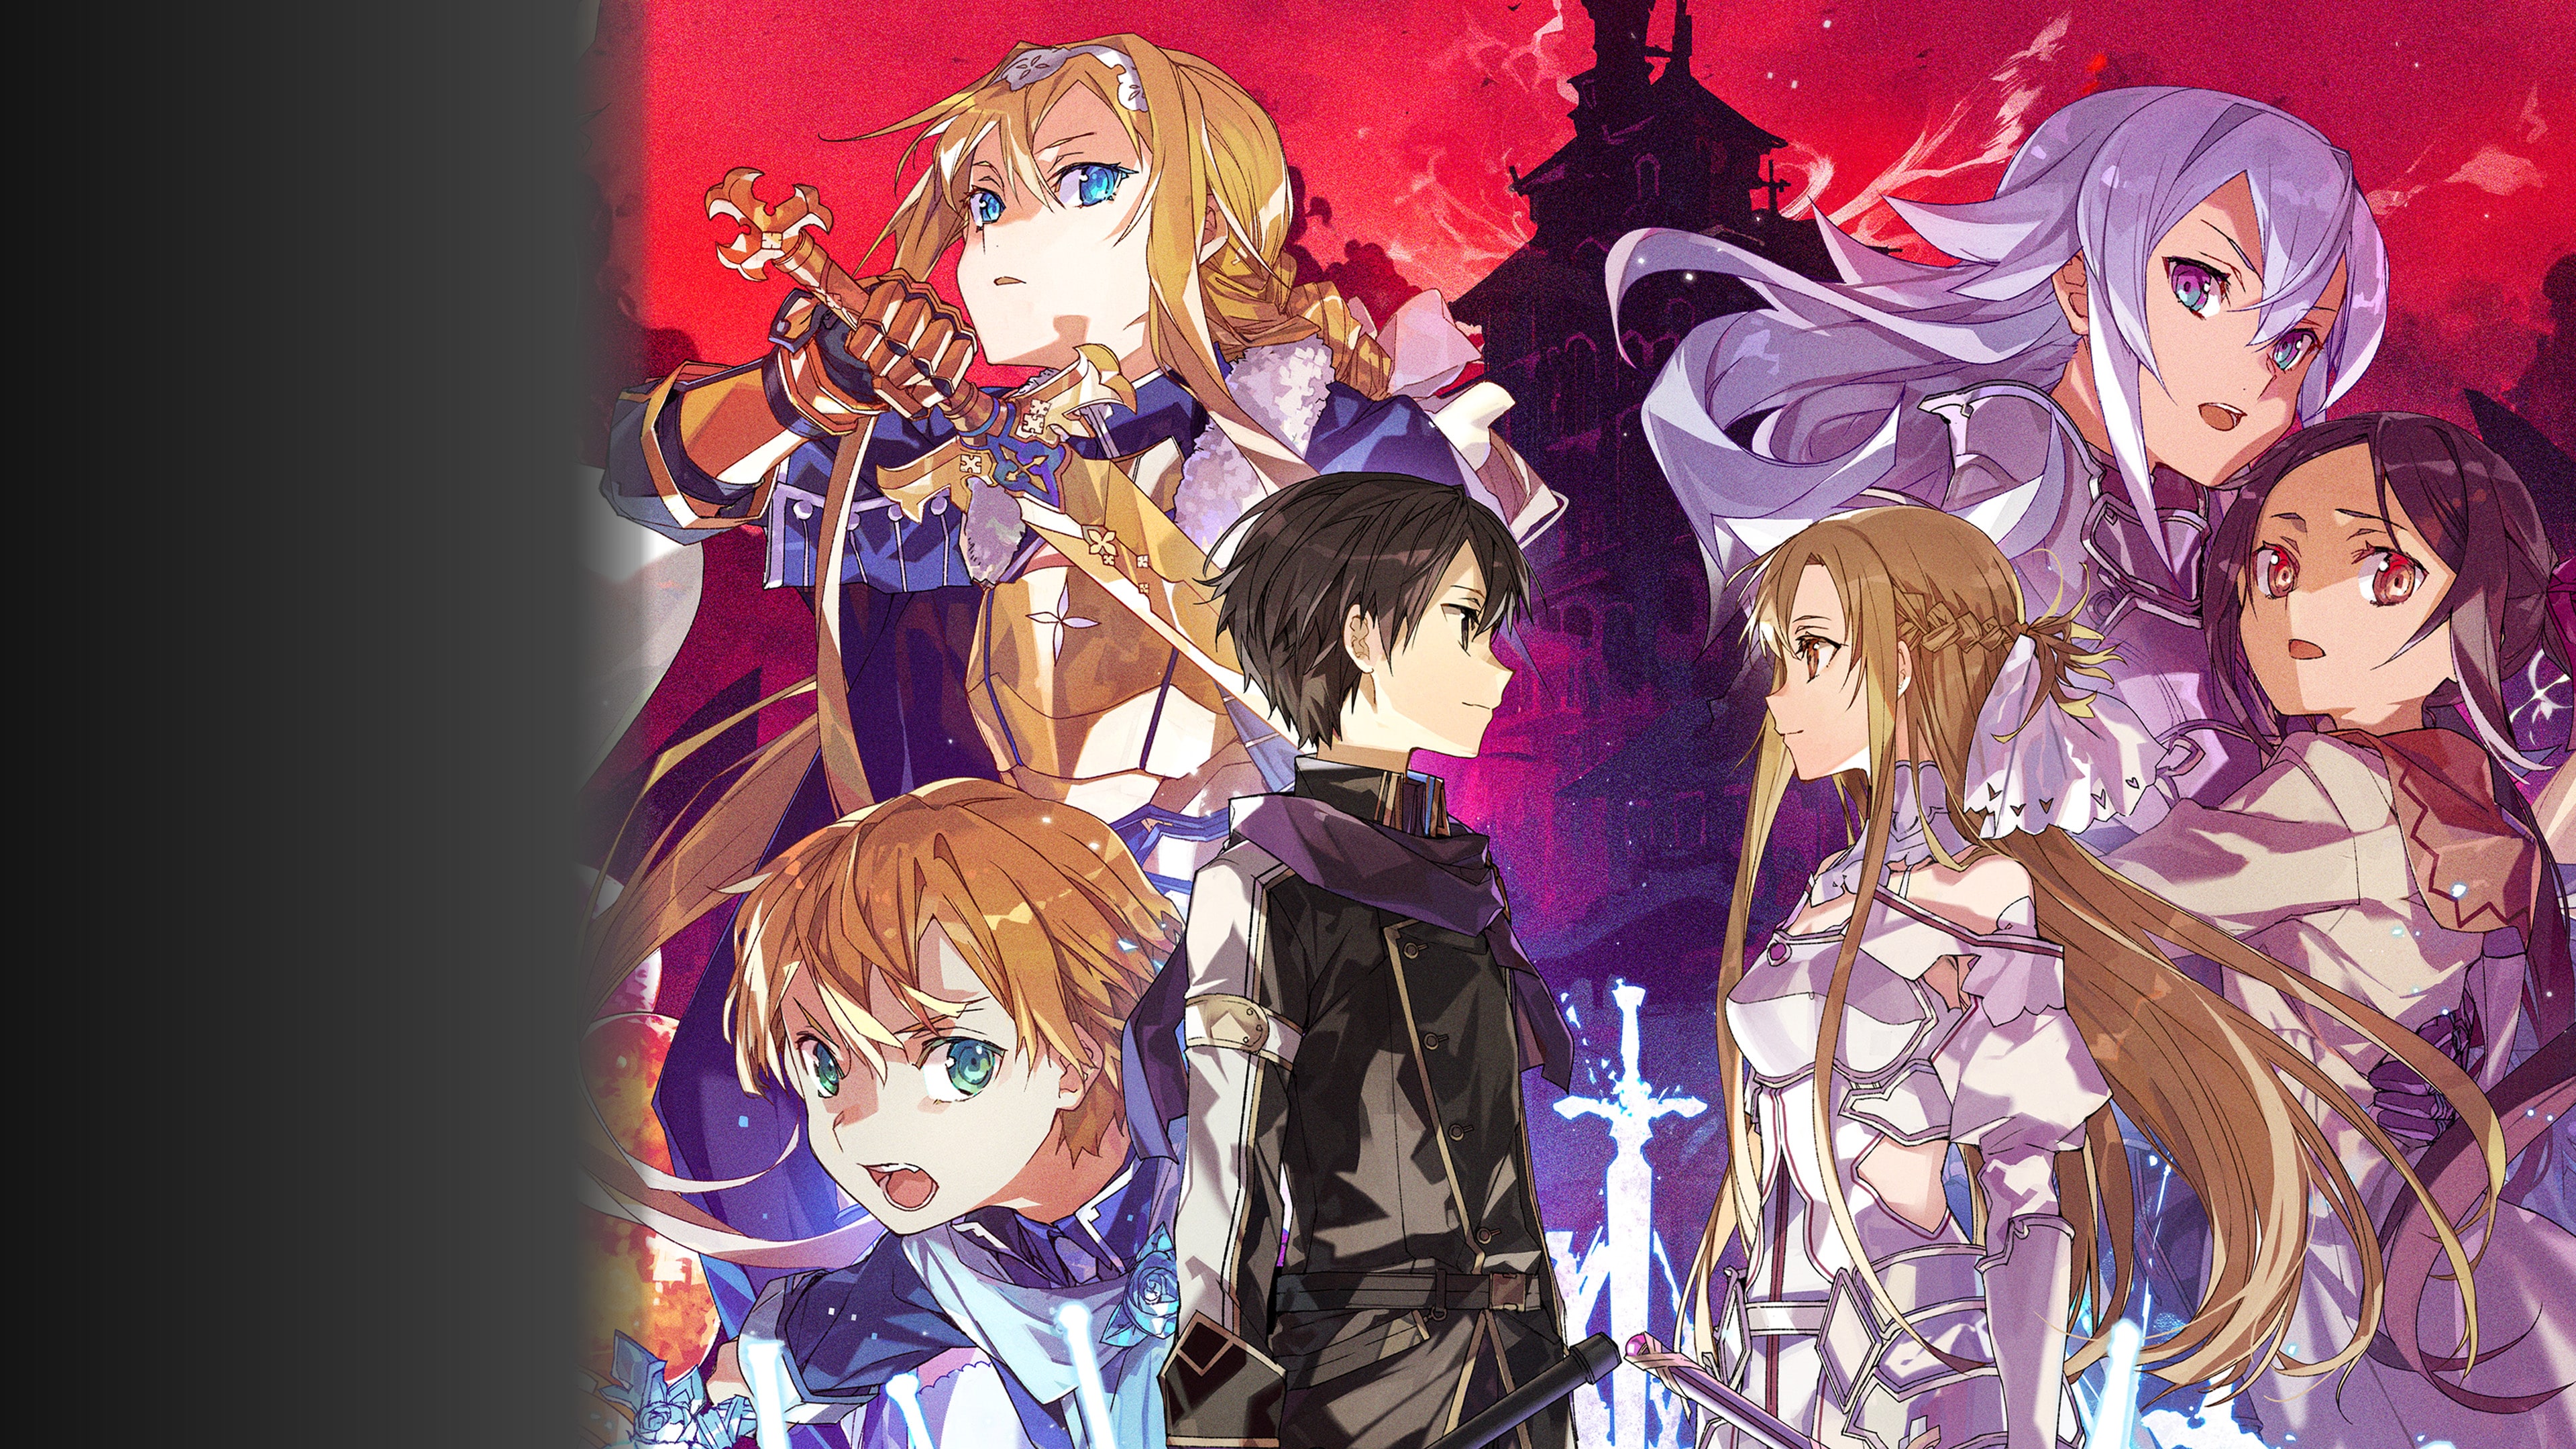 SWORD ART ONLINE Last Recollection - Ultimate Edition PS4 & PS5 (Simplified Chinese, English, Korean, Japanese, Traditional Chinese)